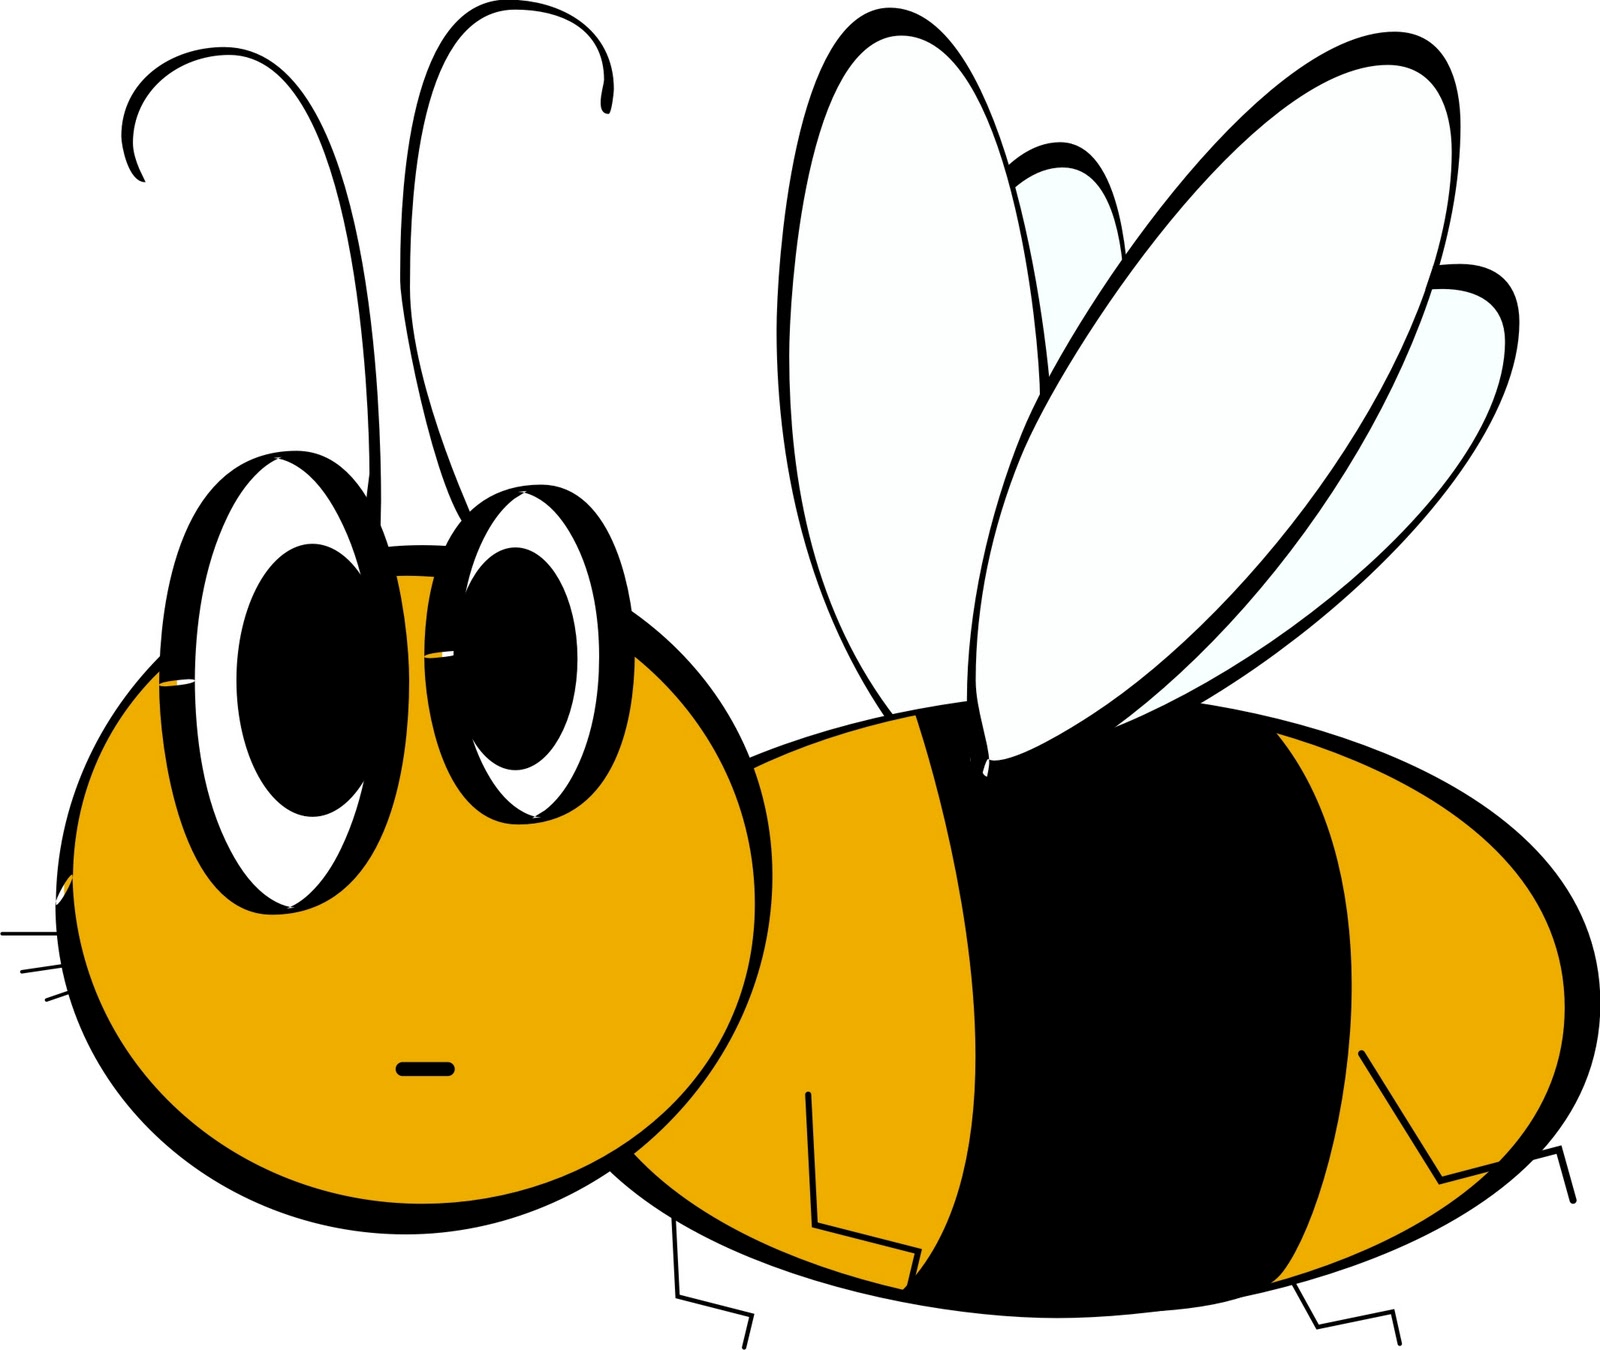 spelling bee clip art images - photo #30